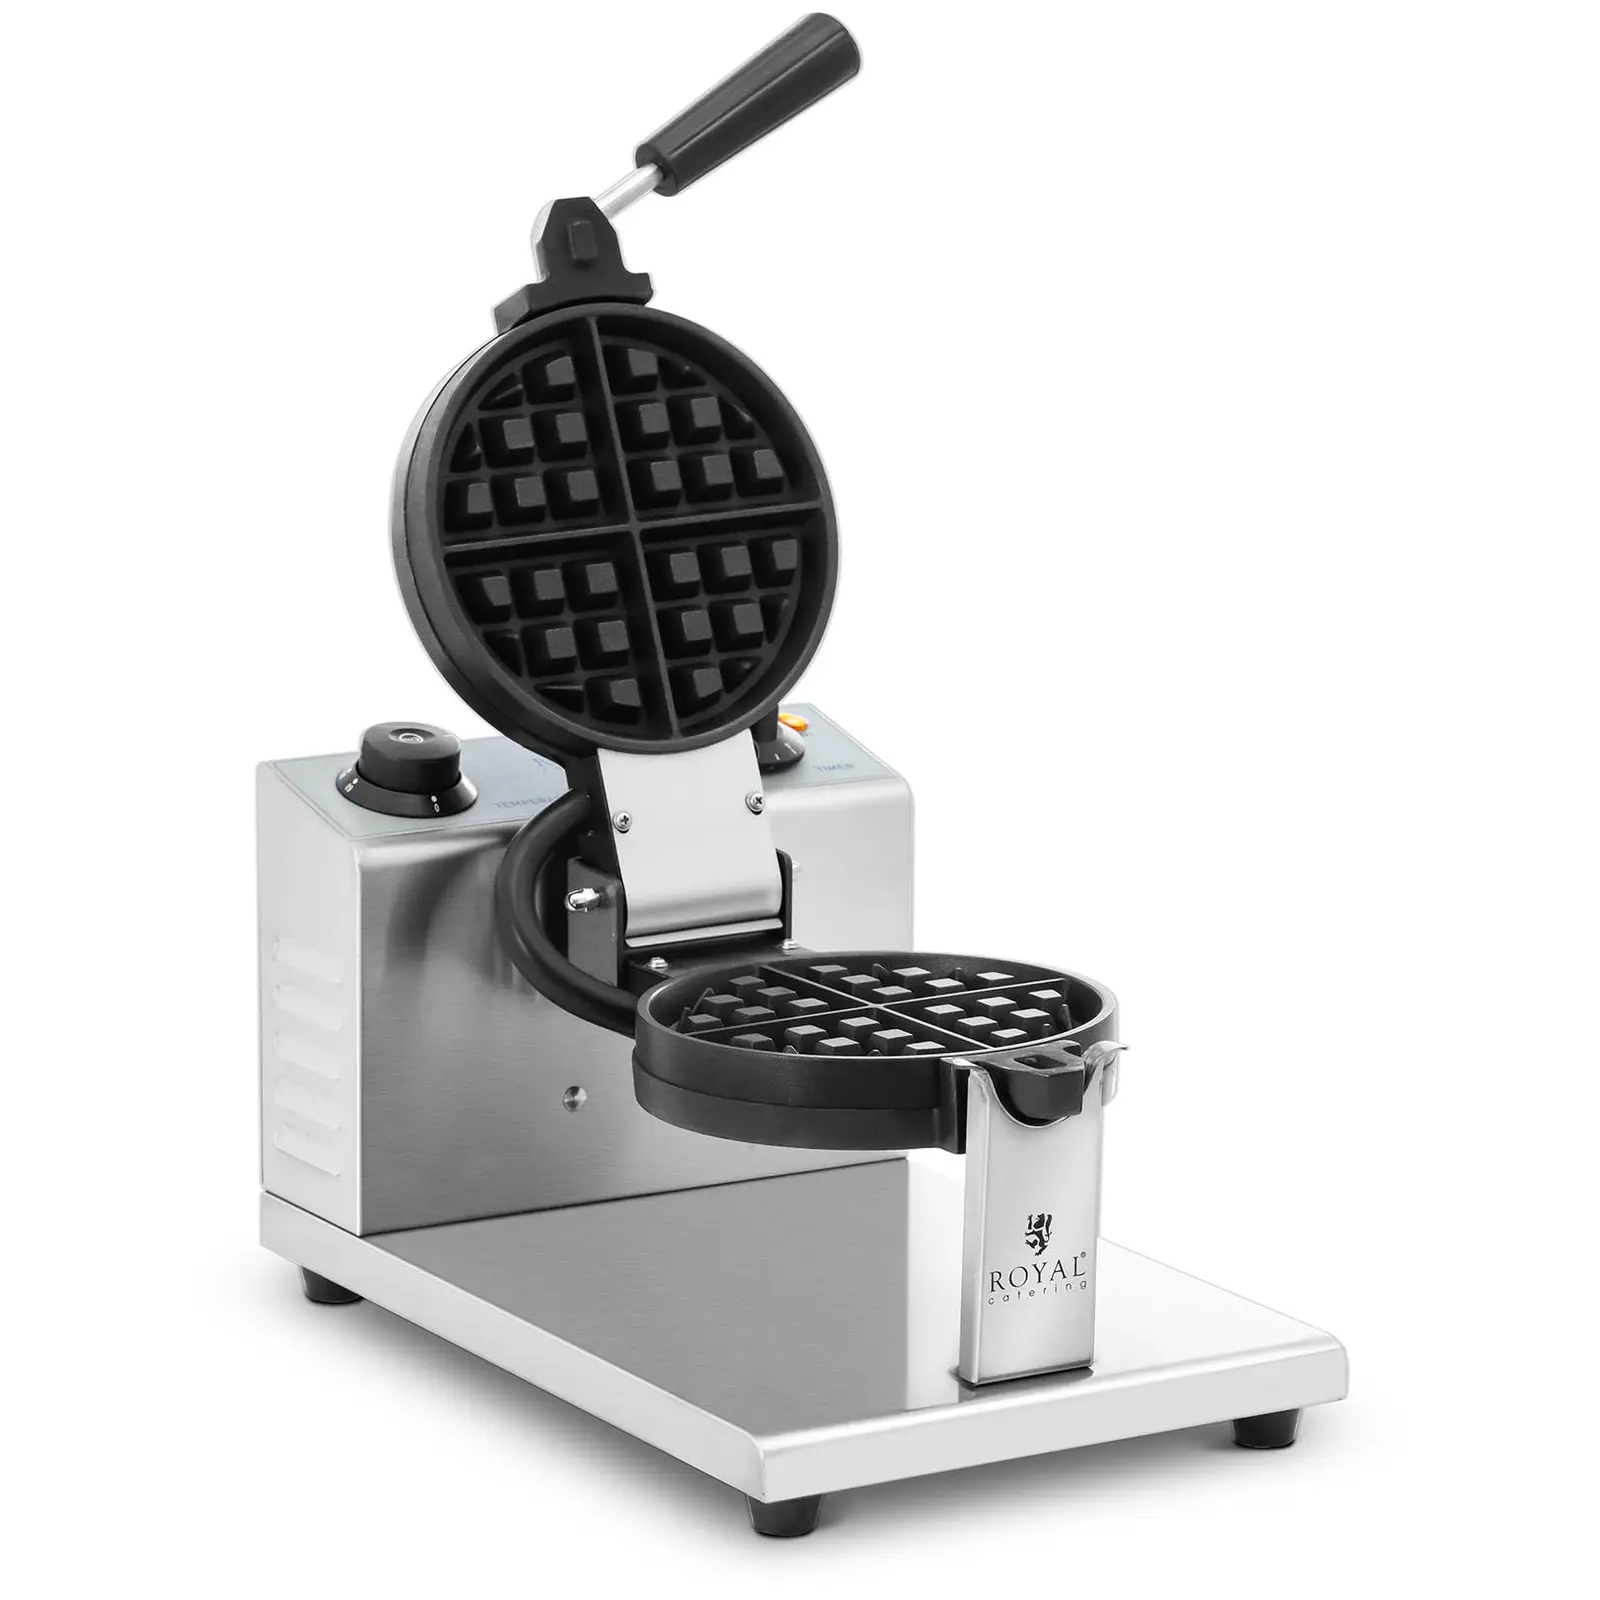 Occasion Gaufrier professionnel - rond - 4 petites gaufres - 1200 W - Royal Catering